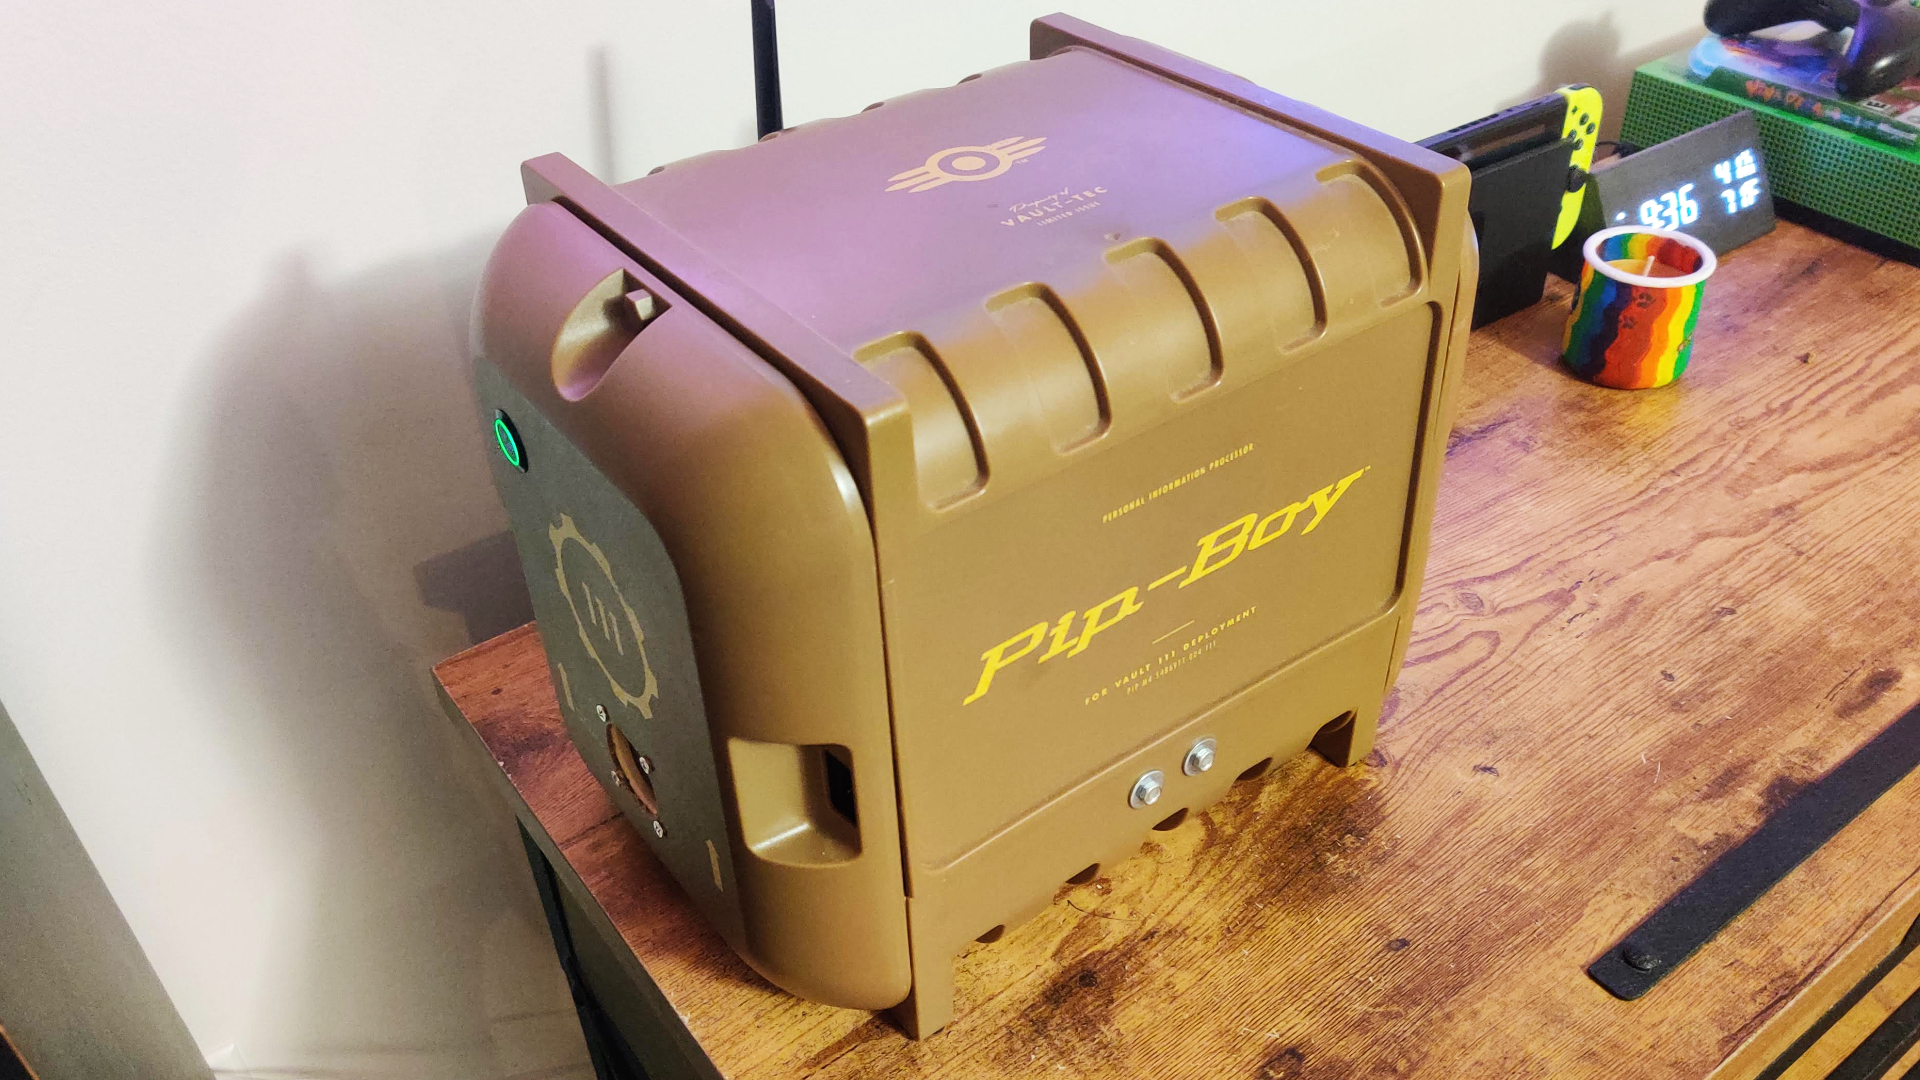 Meet the Fallout 4 Pip-Boy gaming PC mod you can’t fit on your wrist